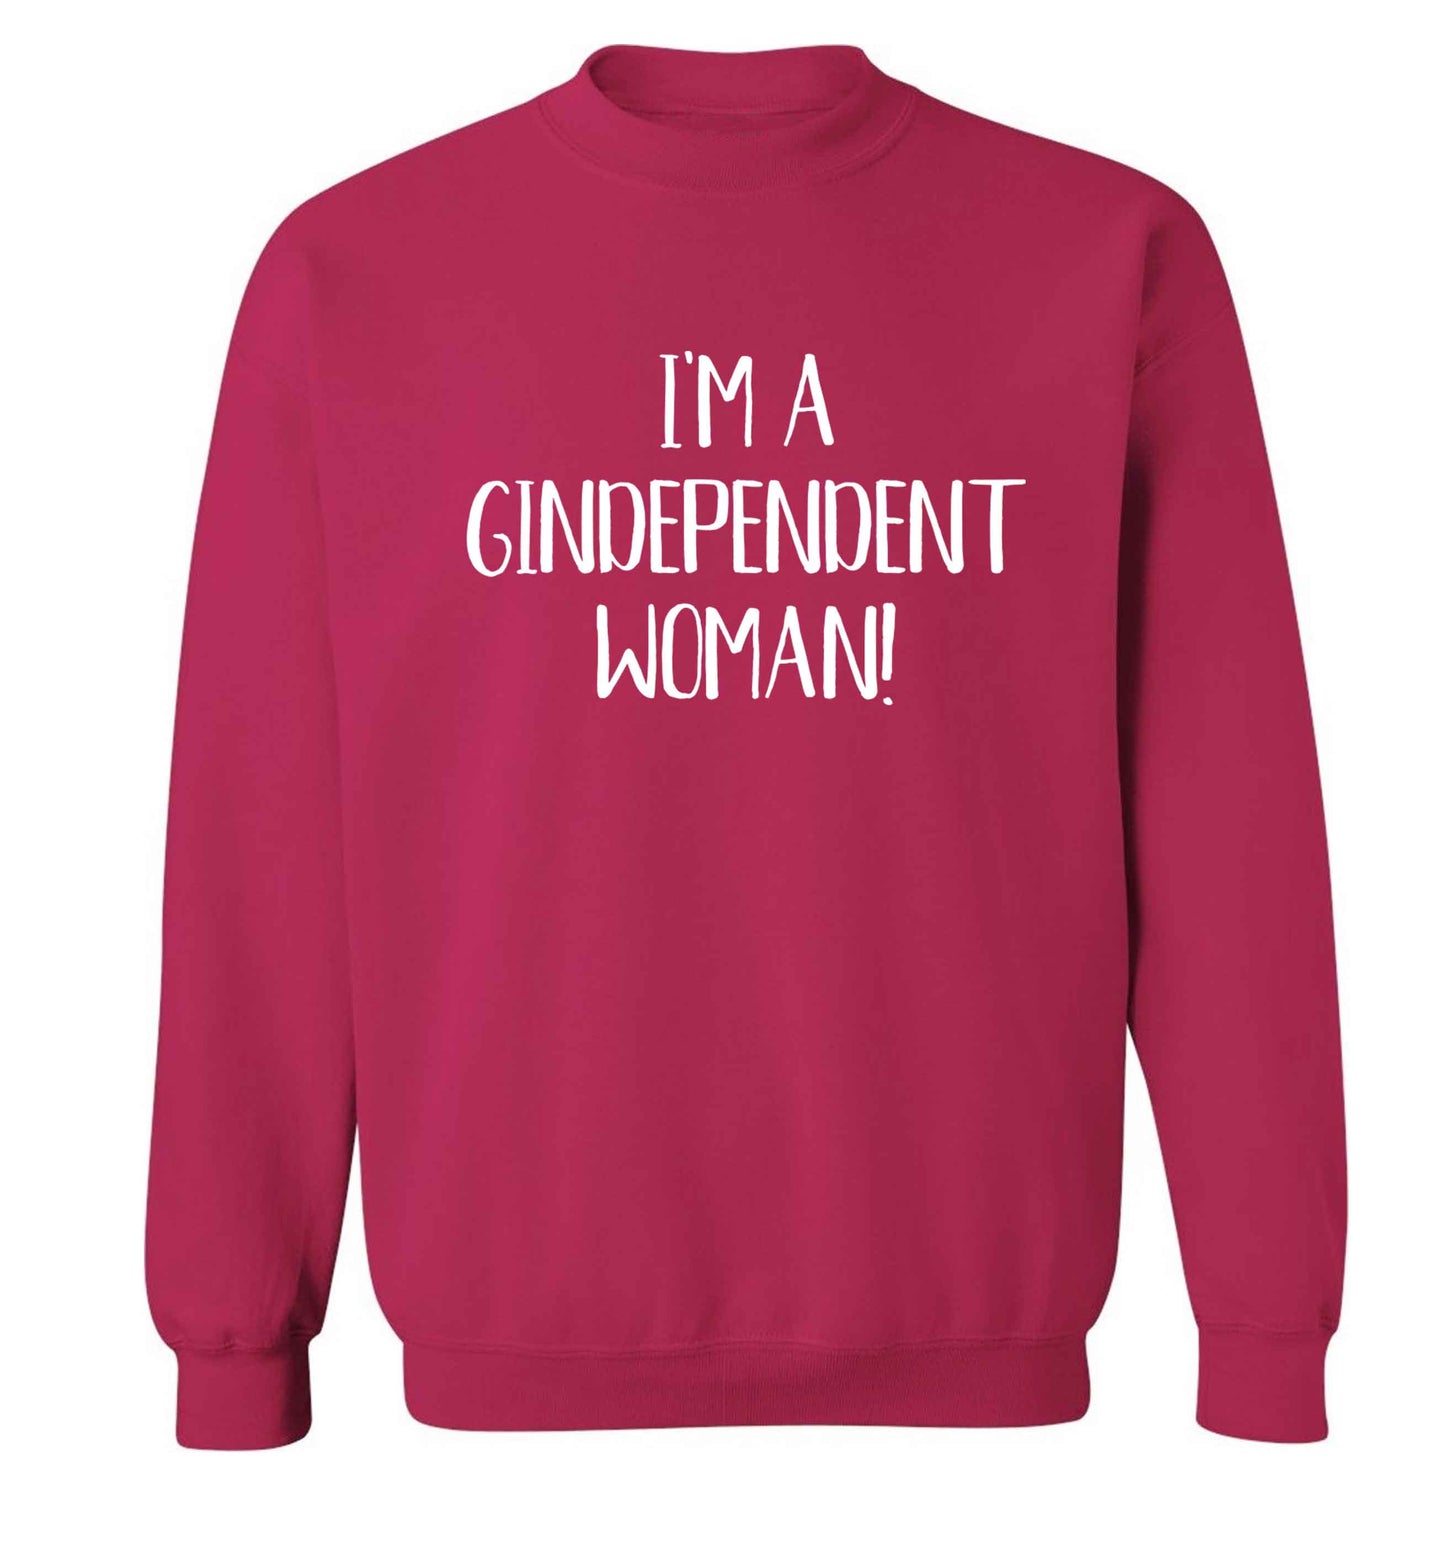 I'm a gindependent woman Adult's unisex pink Sweater 2XL